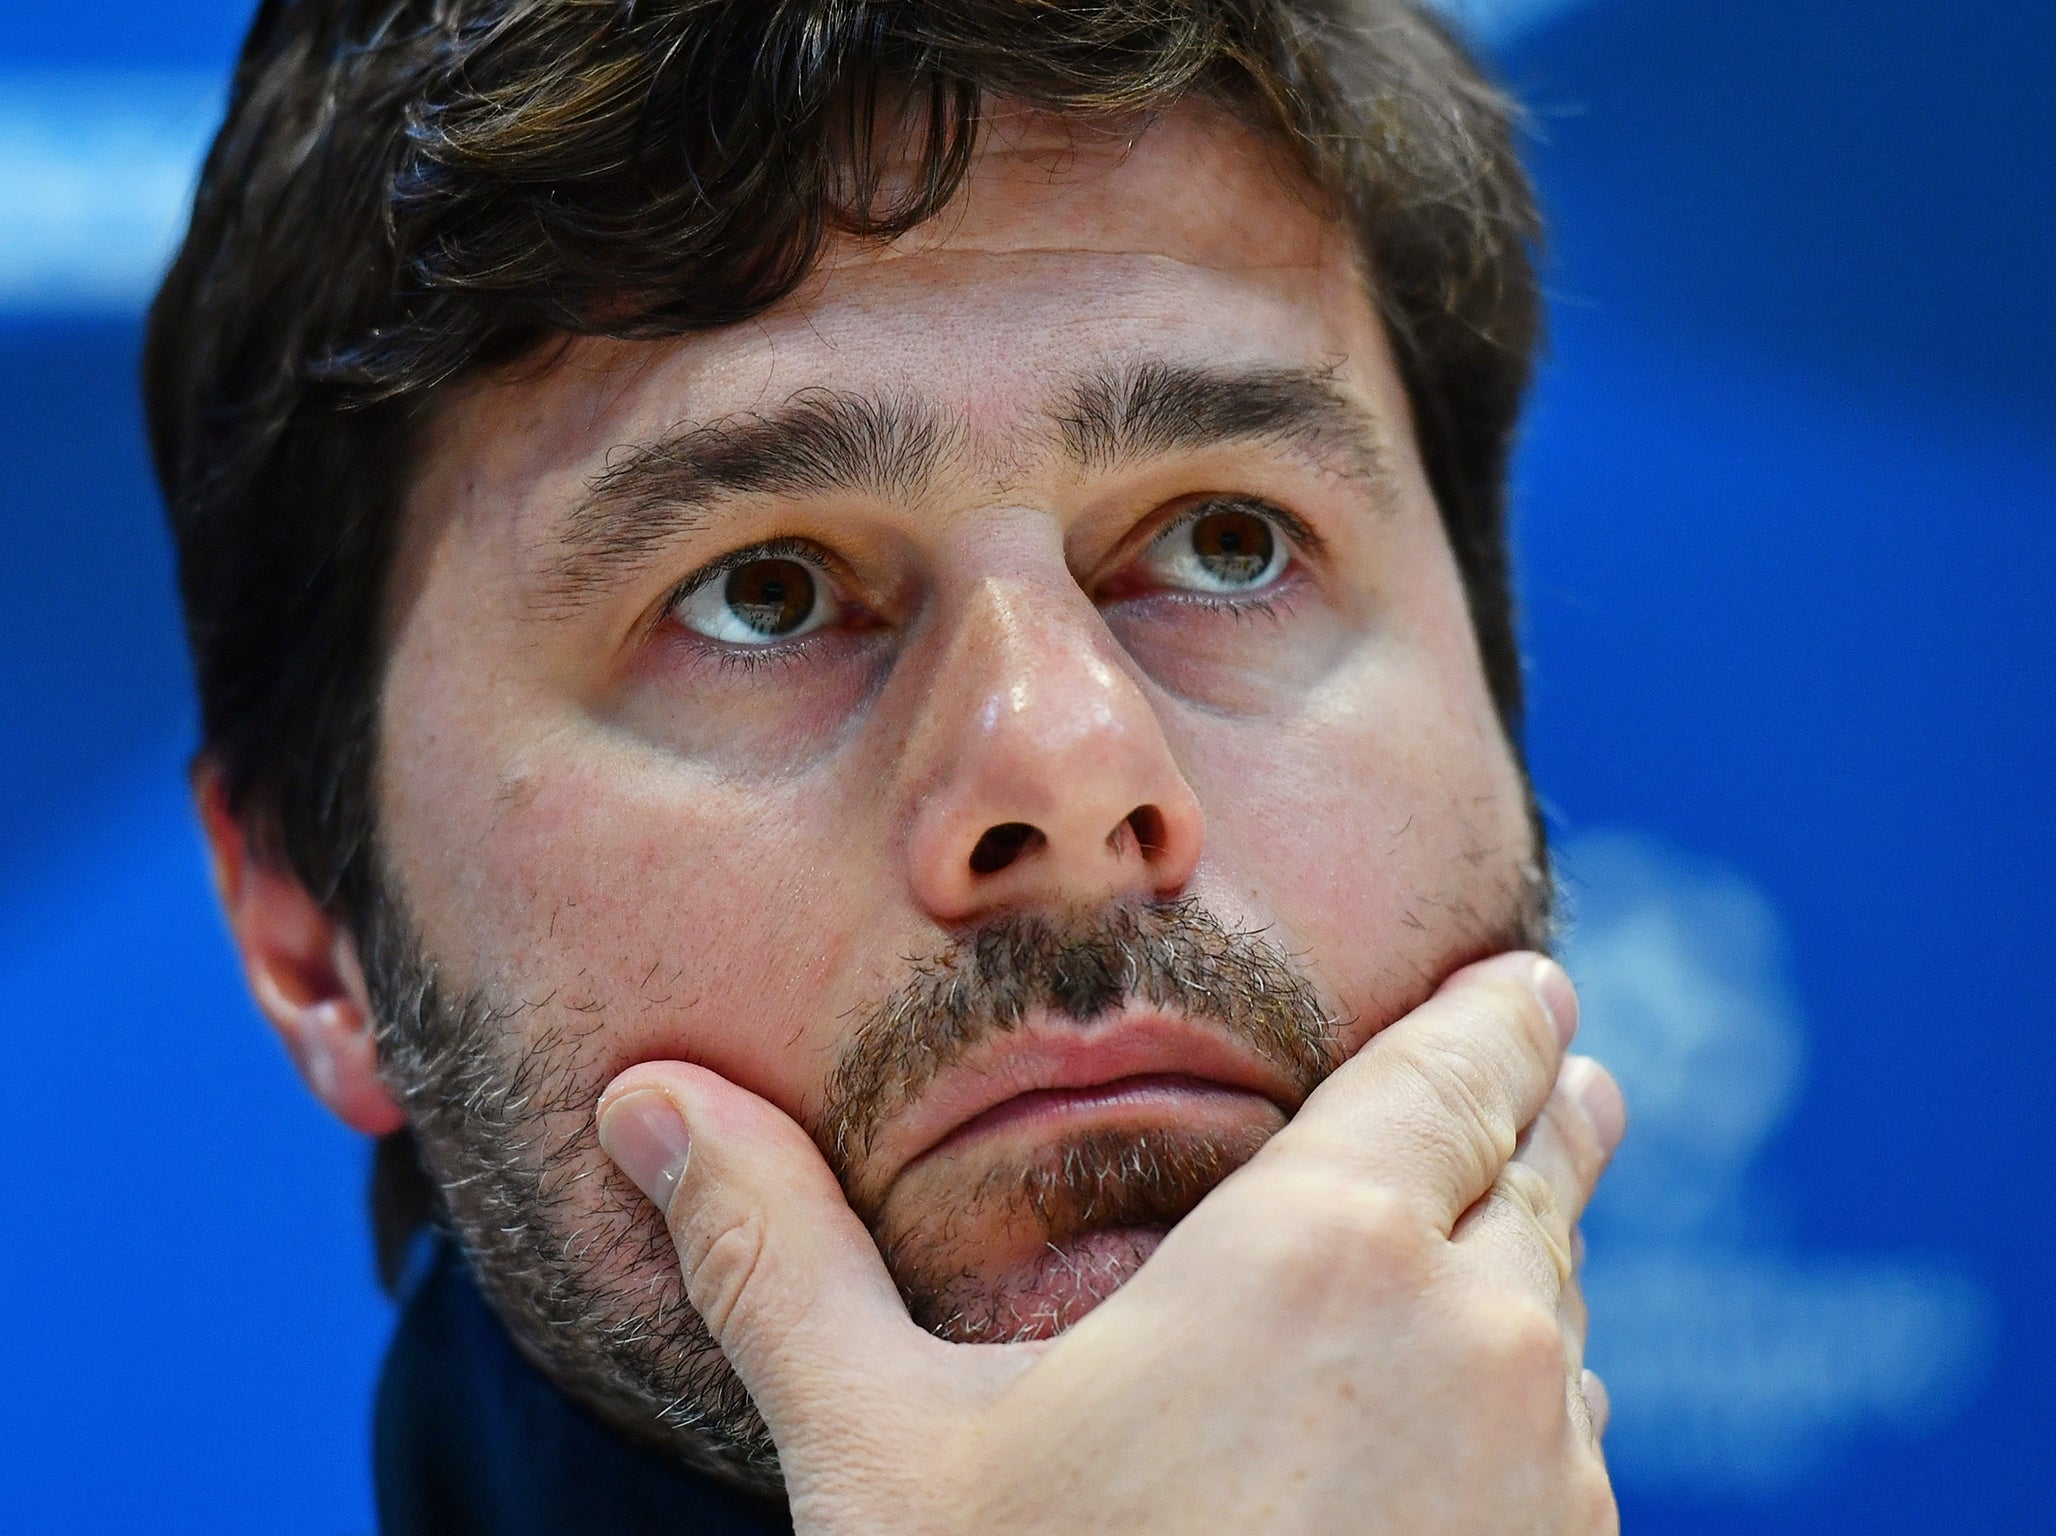 Pochettino was not happy with Guardiola's comments